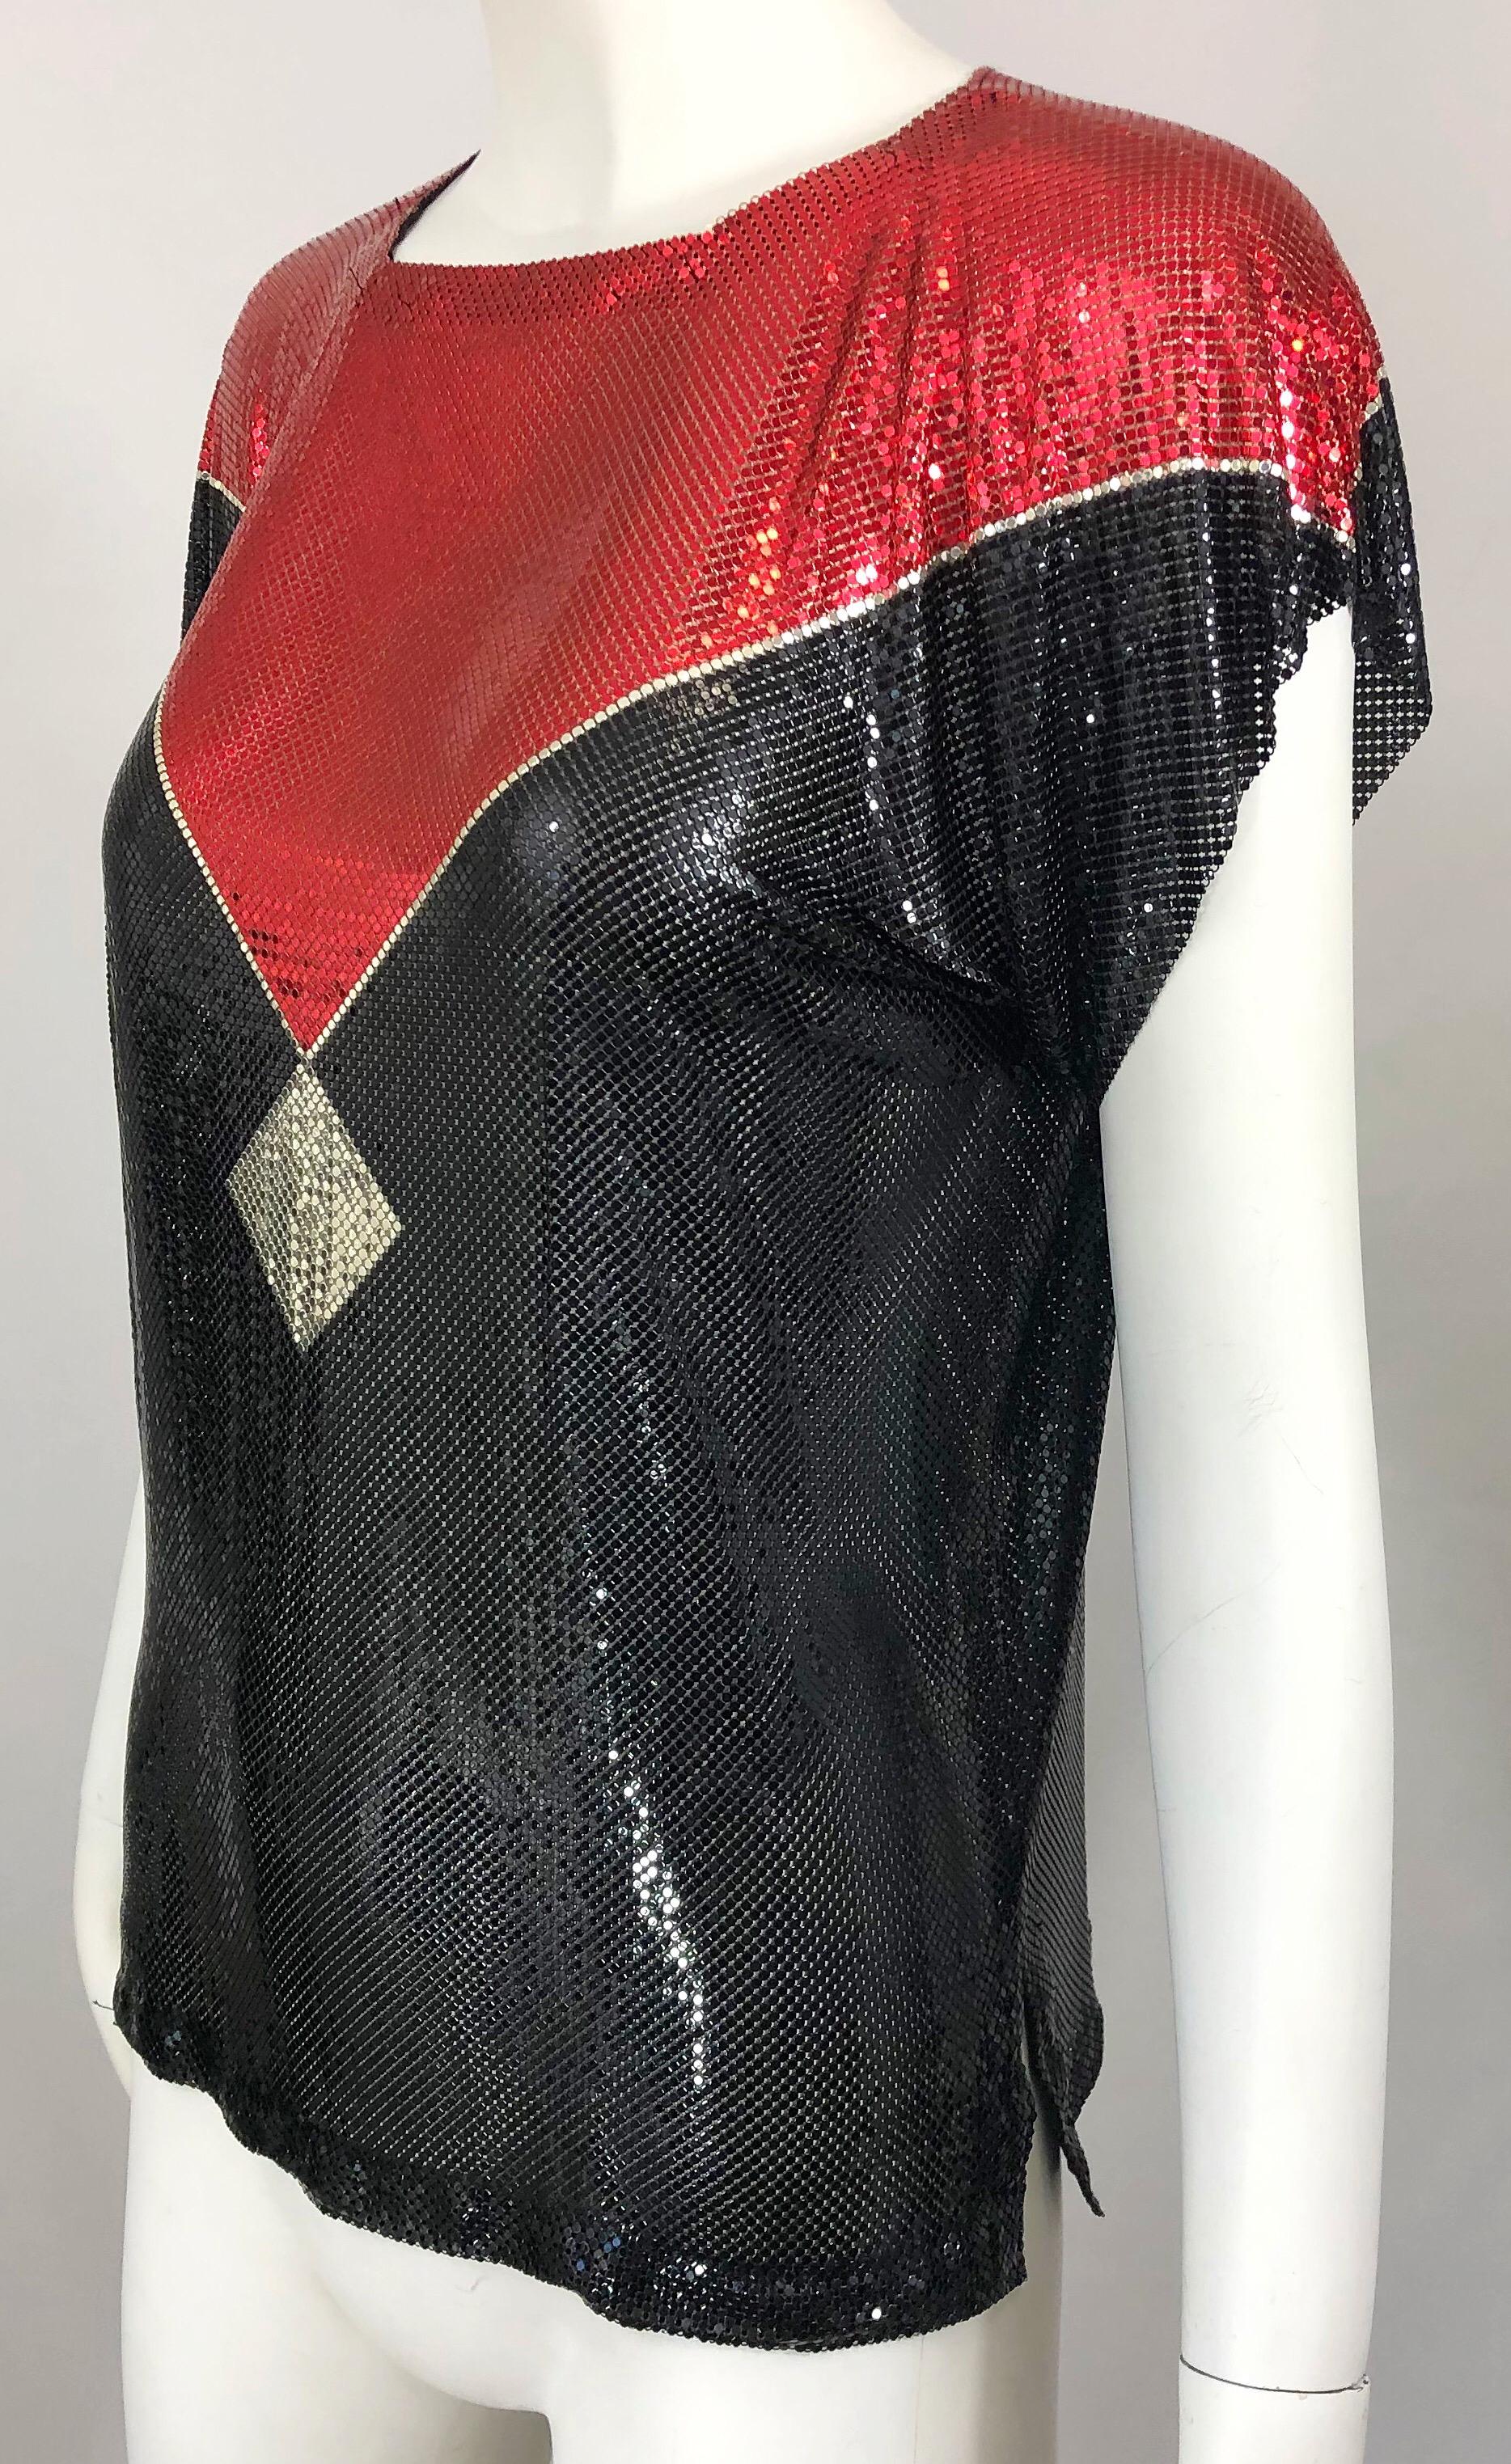 Avant Garde 1970s Whiting & Davis Red + Black + Silver Chainmail Metal Mesh Top For Sale 3